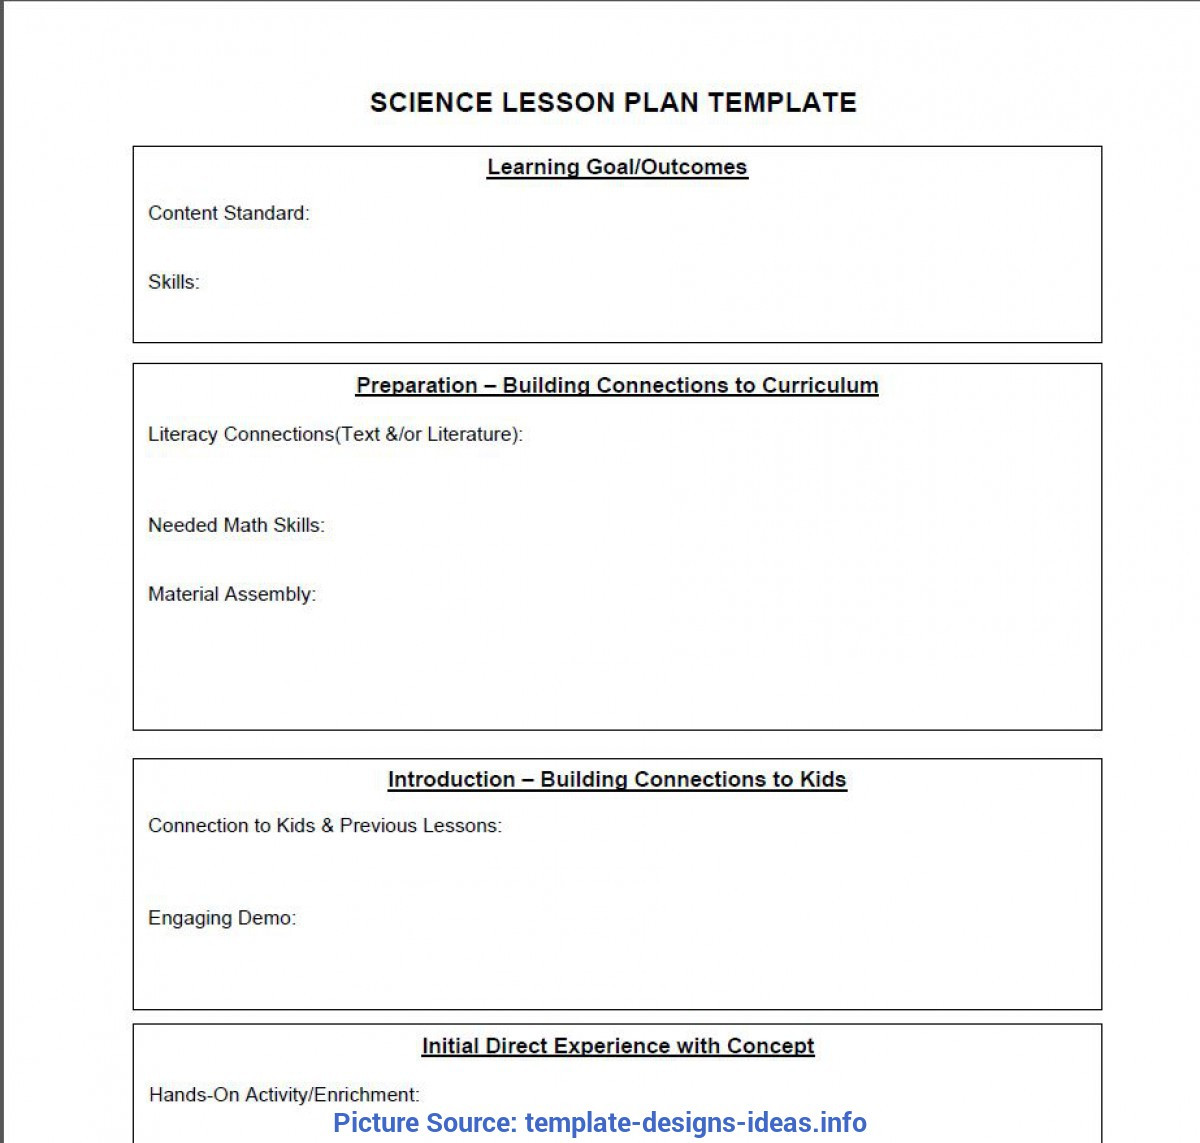 Middle School Science Lesson Plans Plex Lessons Learned format Lessons Learned Template